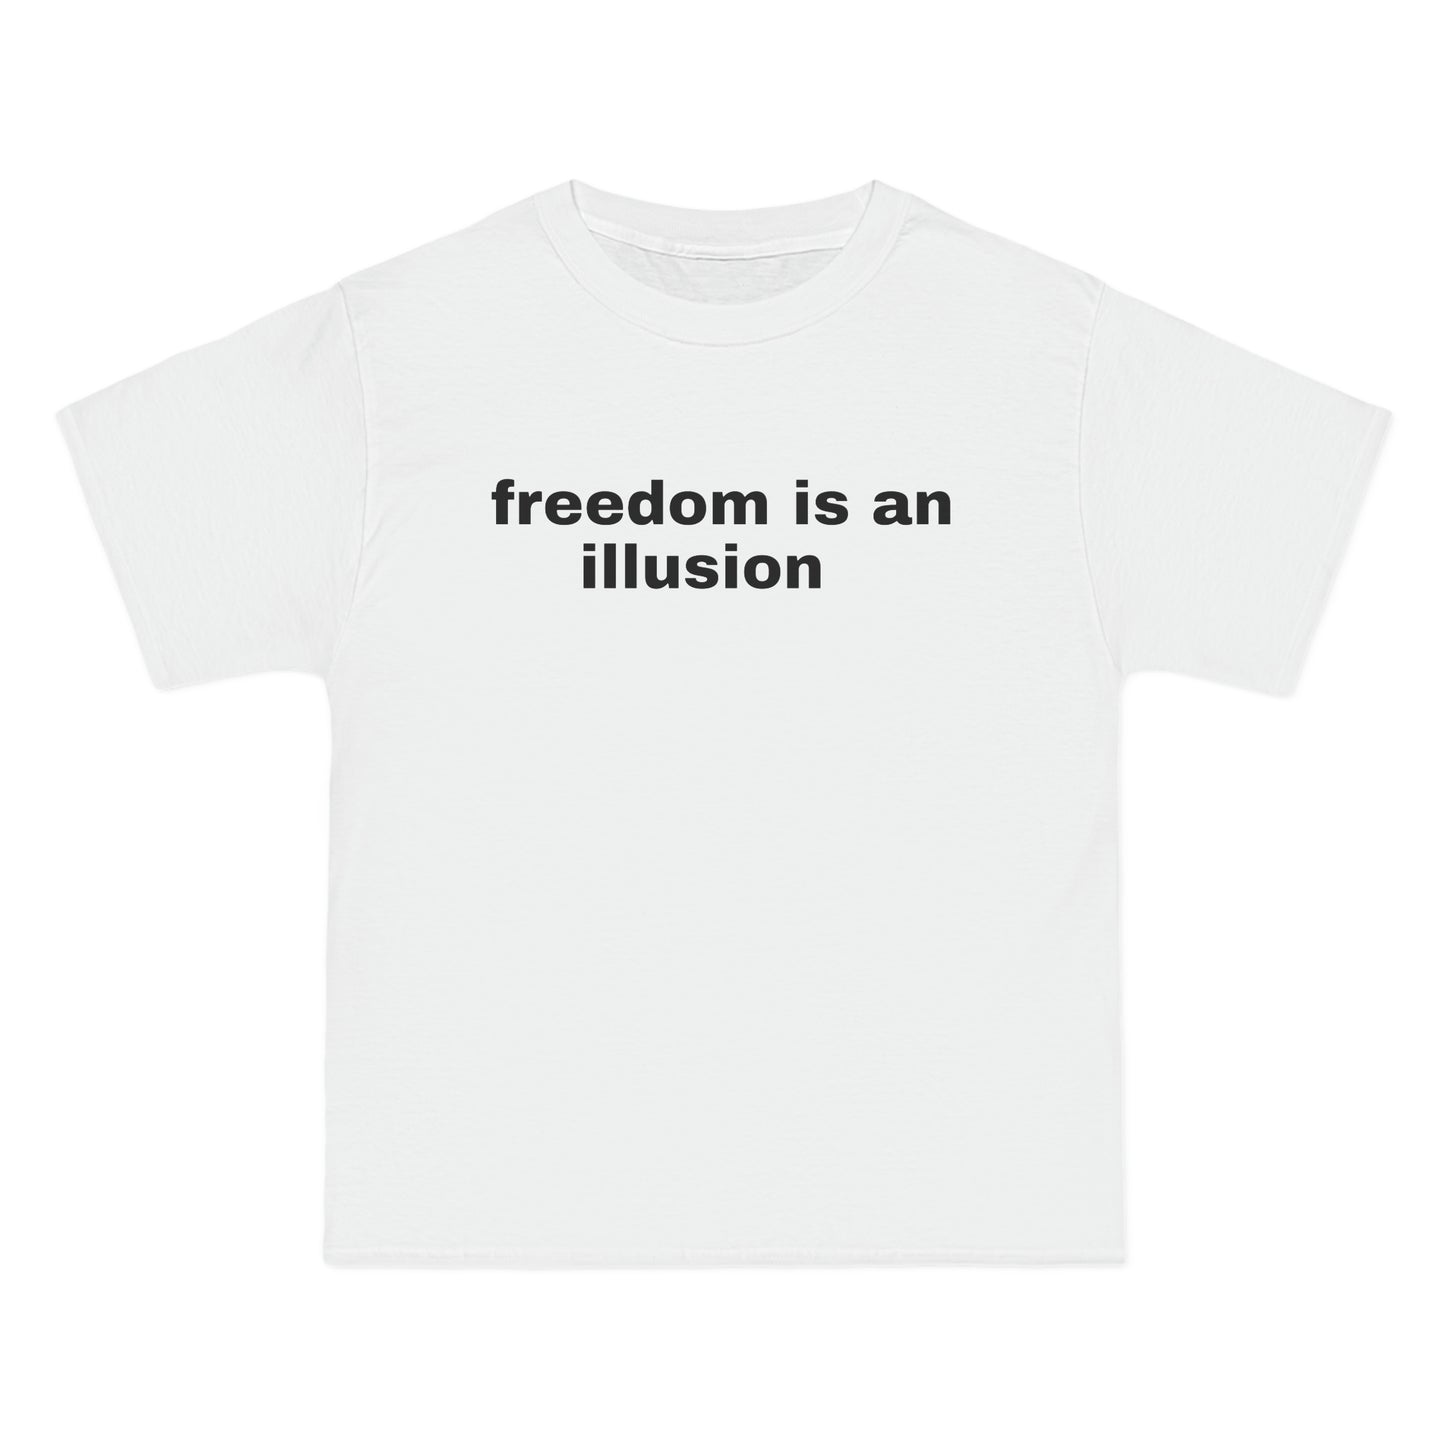 freedom is an illusion Tee